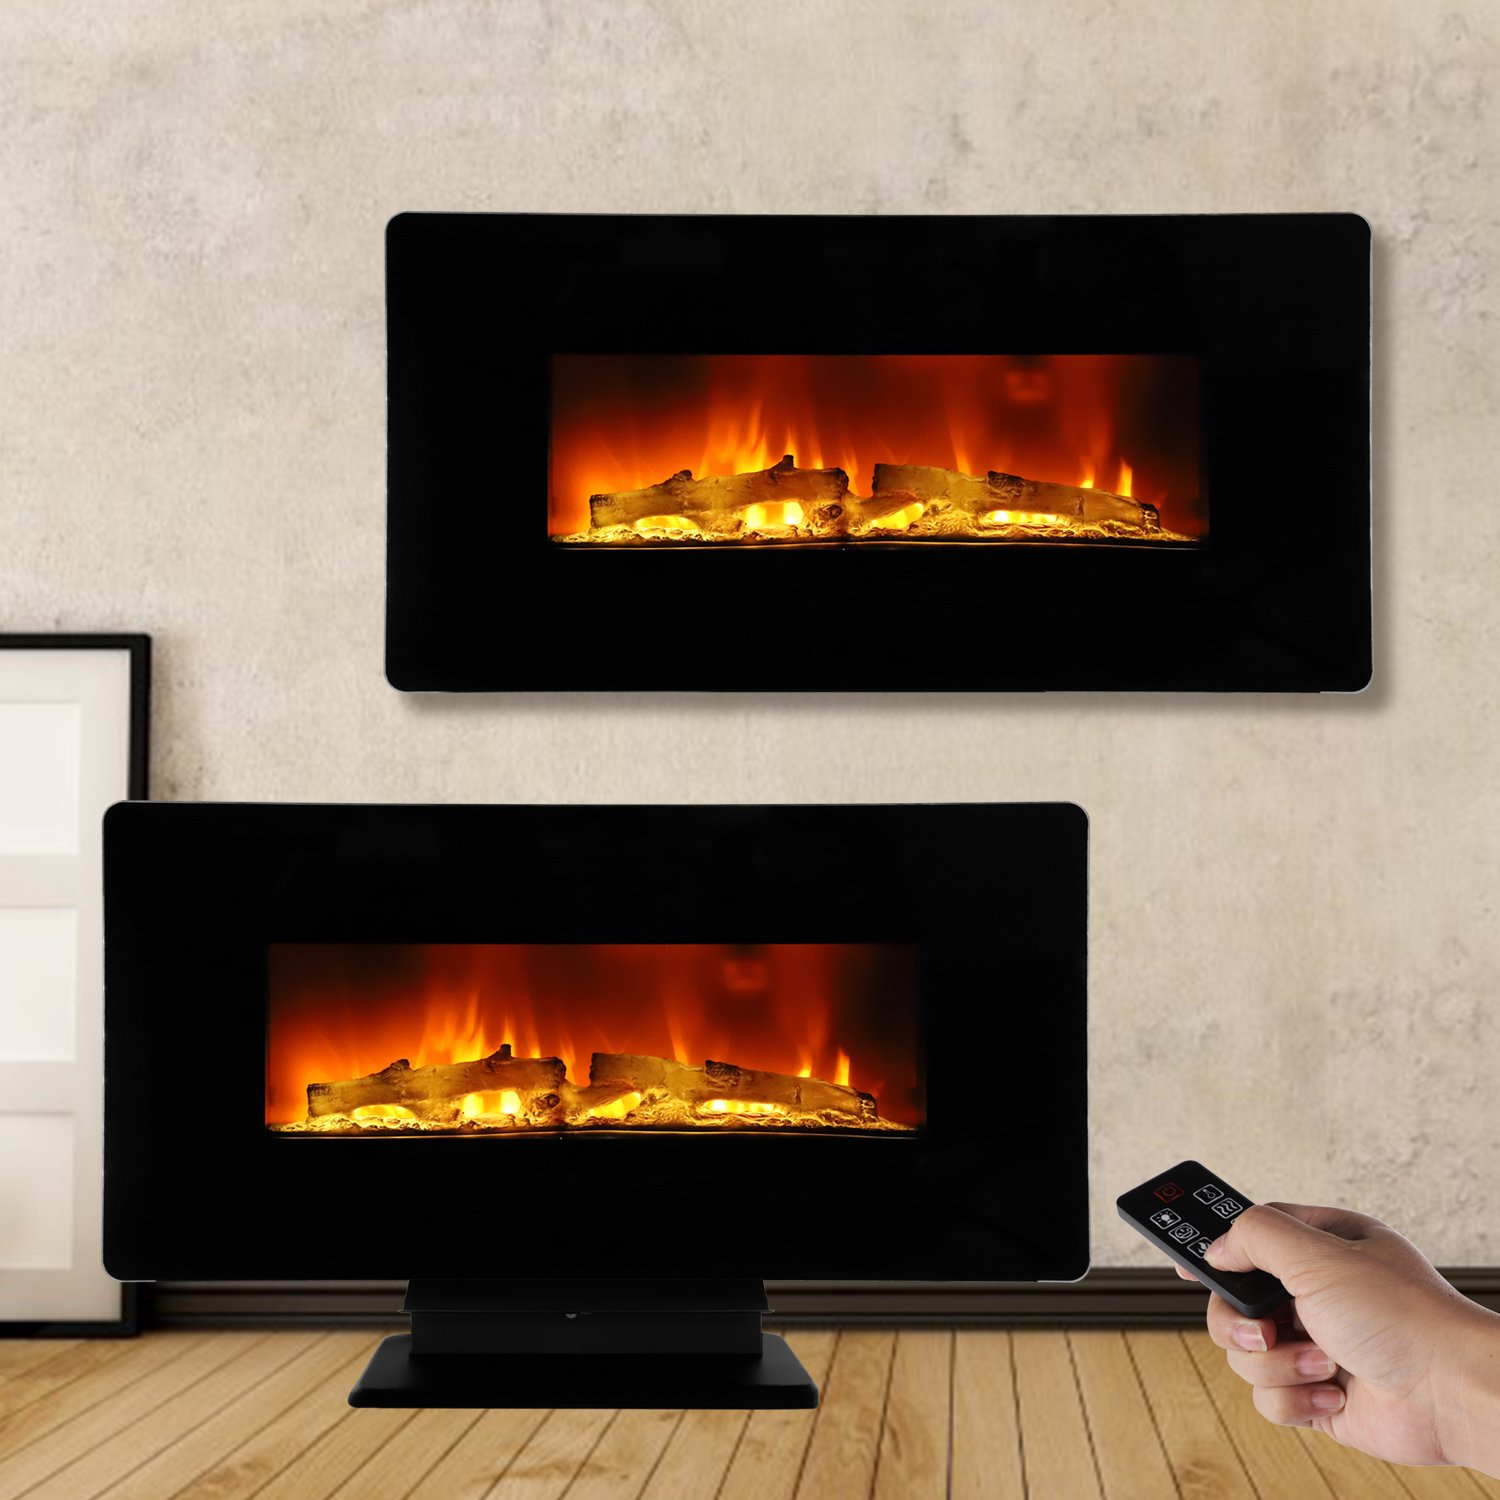 36 Inch Curved Front Electric Fireplace,Freestanding or Wall Mounted Electric Fireplace with Adjustable Flame Color & Remote Control - Tonkn